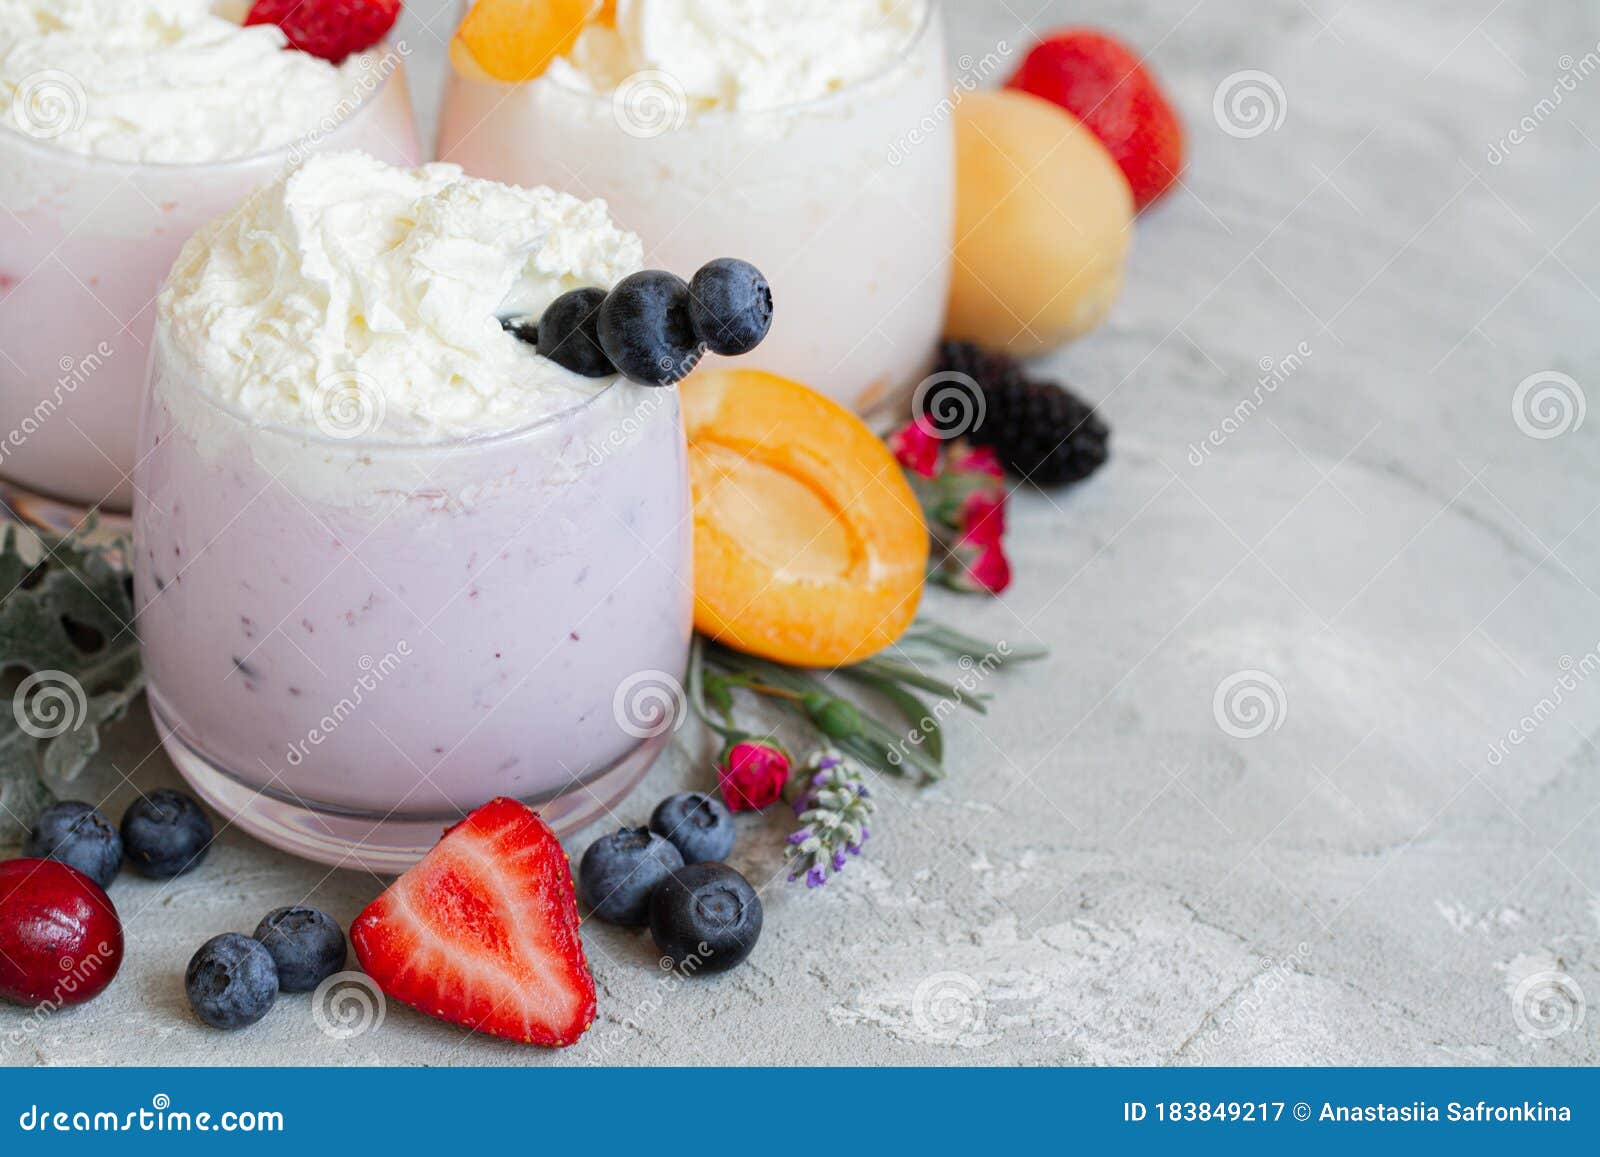 strawberry, blueberry smoothie on light background. well being and weight loos concept. milkshake with fresh berries. healthy